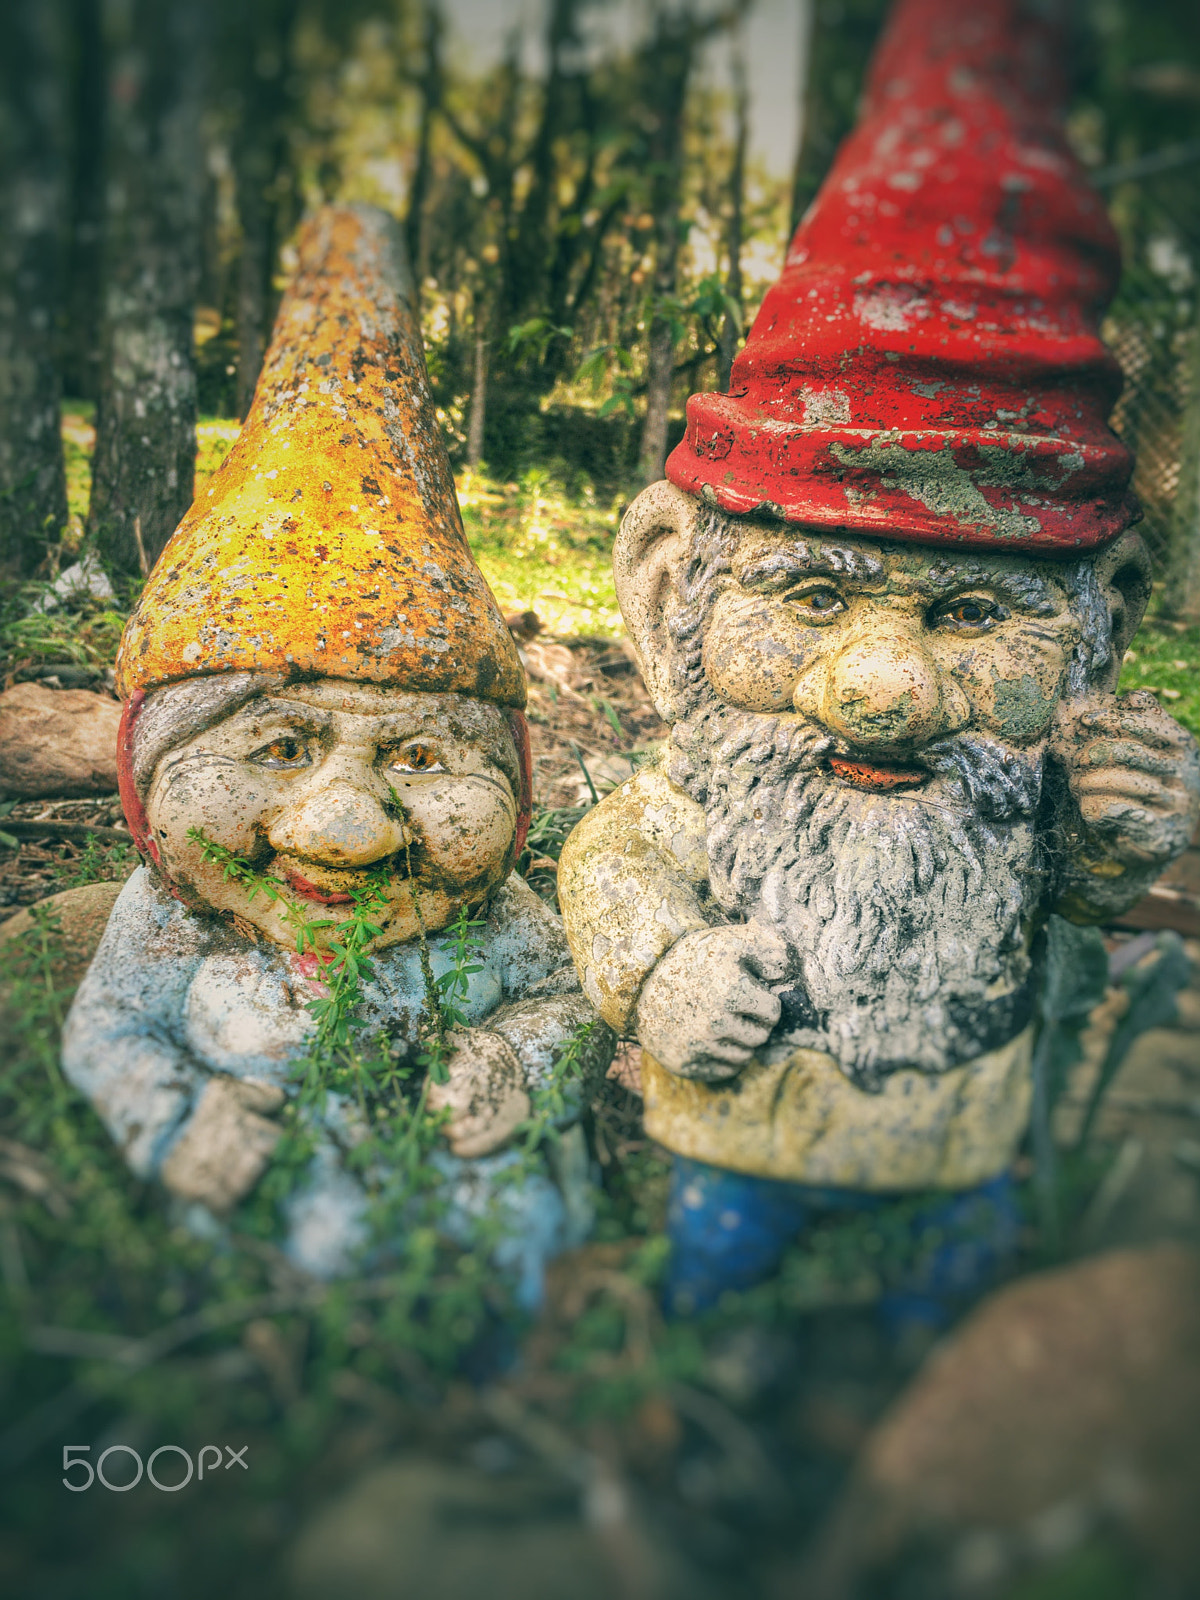 Apple iPhone8,4 + Moment SuperFish 15mm sample photo. Old garden gnome photography